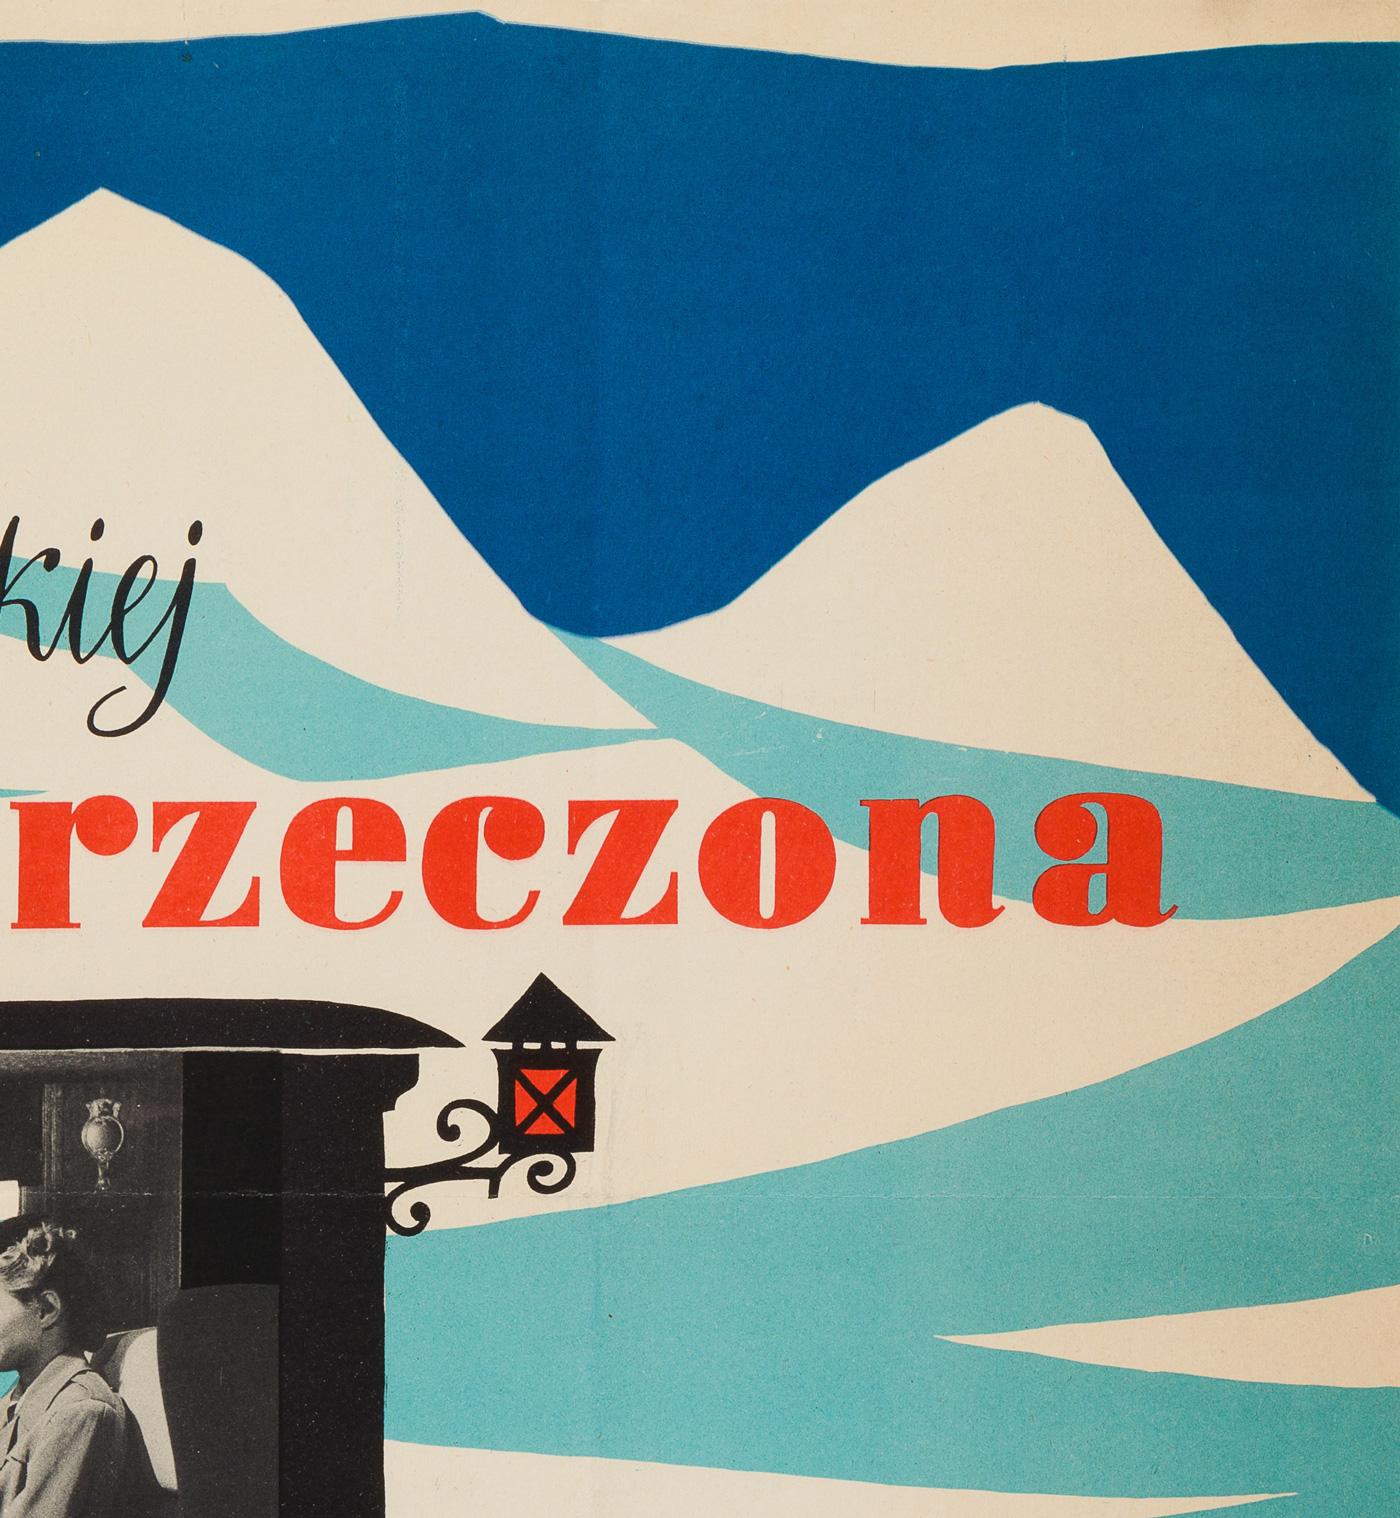 Andrzej Heidrich’s vintage bewitching graphics for the original polish poster for Hitchcock's film Spellbound. Great colors. Striking blue and white mountains.

Actual movie poster size is 31 1/2 x 23 inches. In near mint condition, folded as